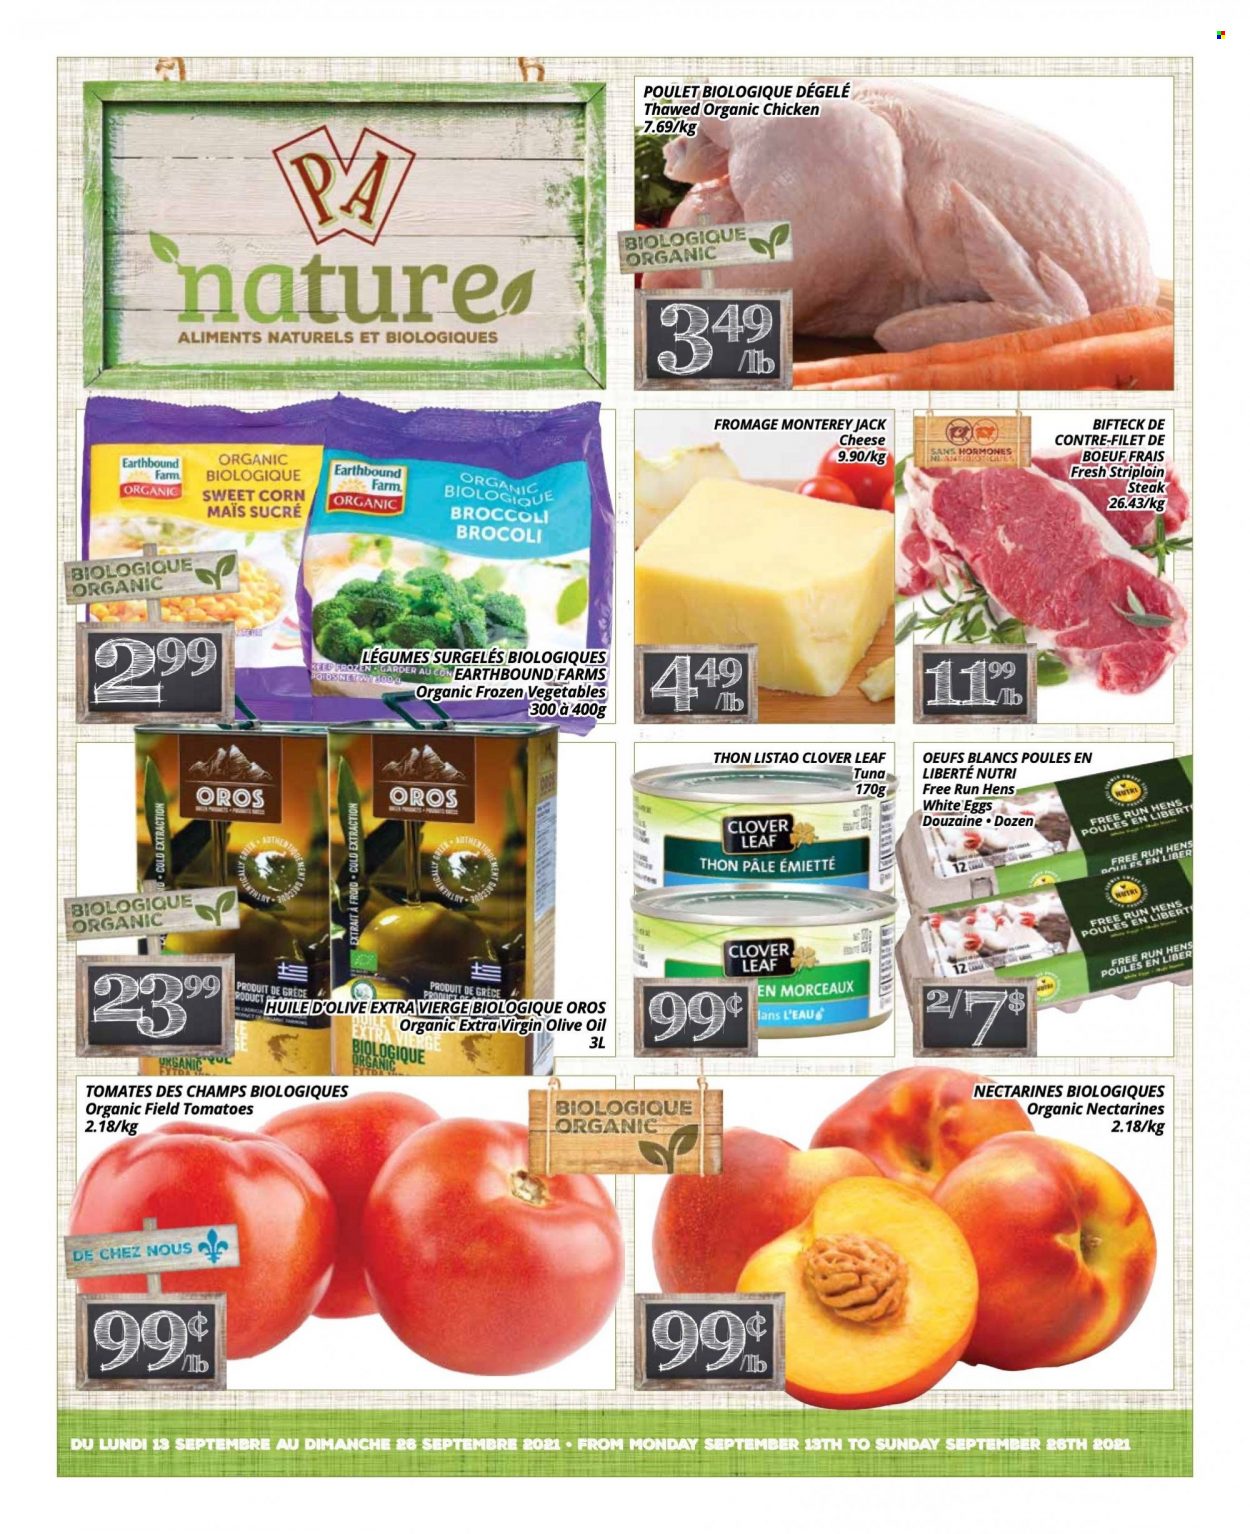 thumbnail - PA Nature Flyer - September 13, 2021 - September 26, 2021 - Sales products - broccoli, corn, tomatoes, sweet corn, nectarines, tuna, Monterey Jack cheese, cheese, Clover, eggs, frozen vegetables, extra virgin olive oil, olive oil, oil, Oros, beef meat, striploin steak, steak. Page 1.